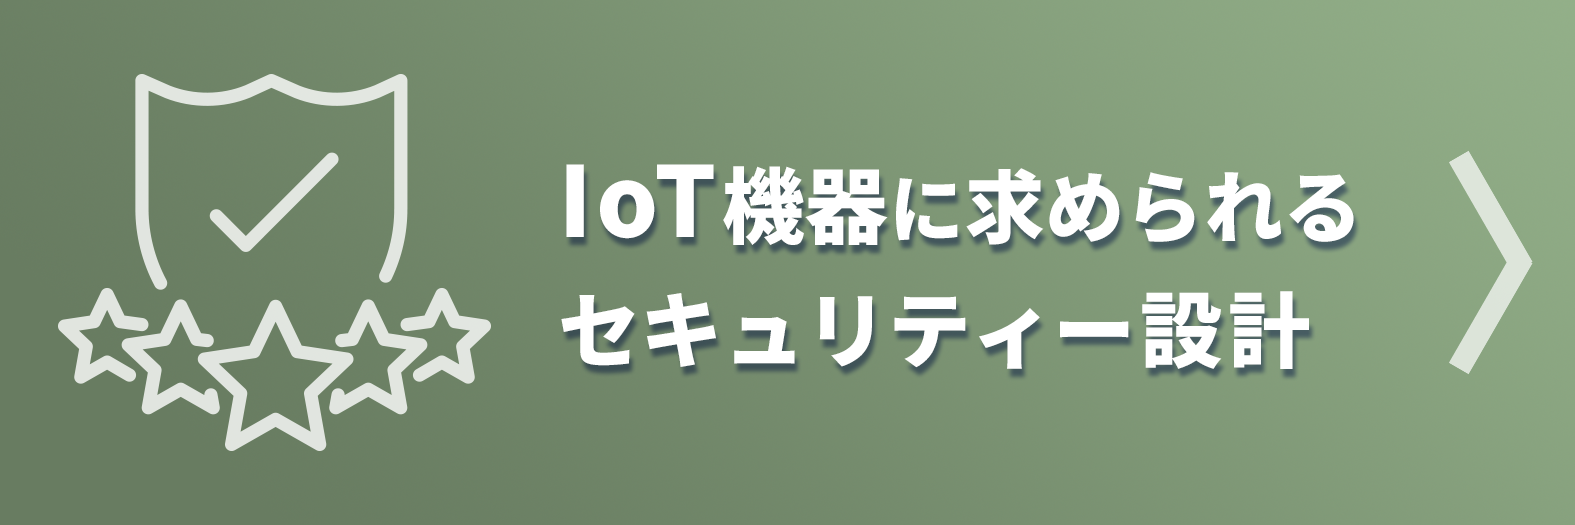 Security design required for IoT devices